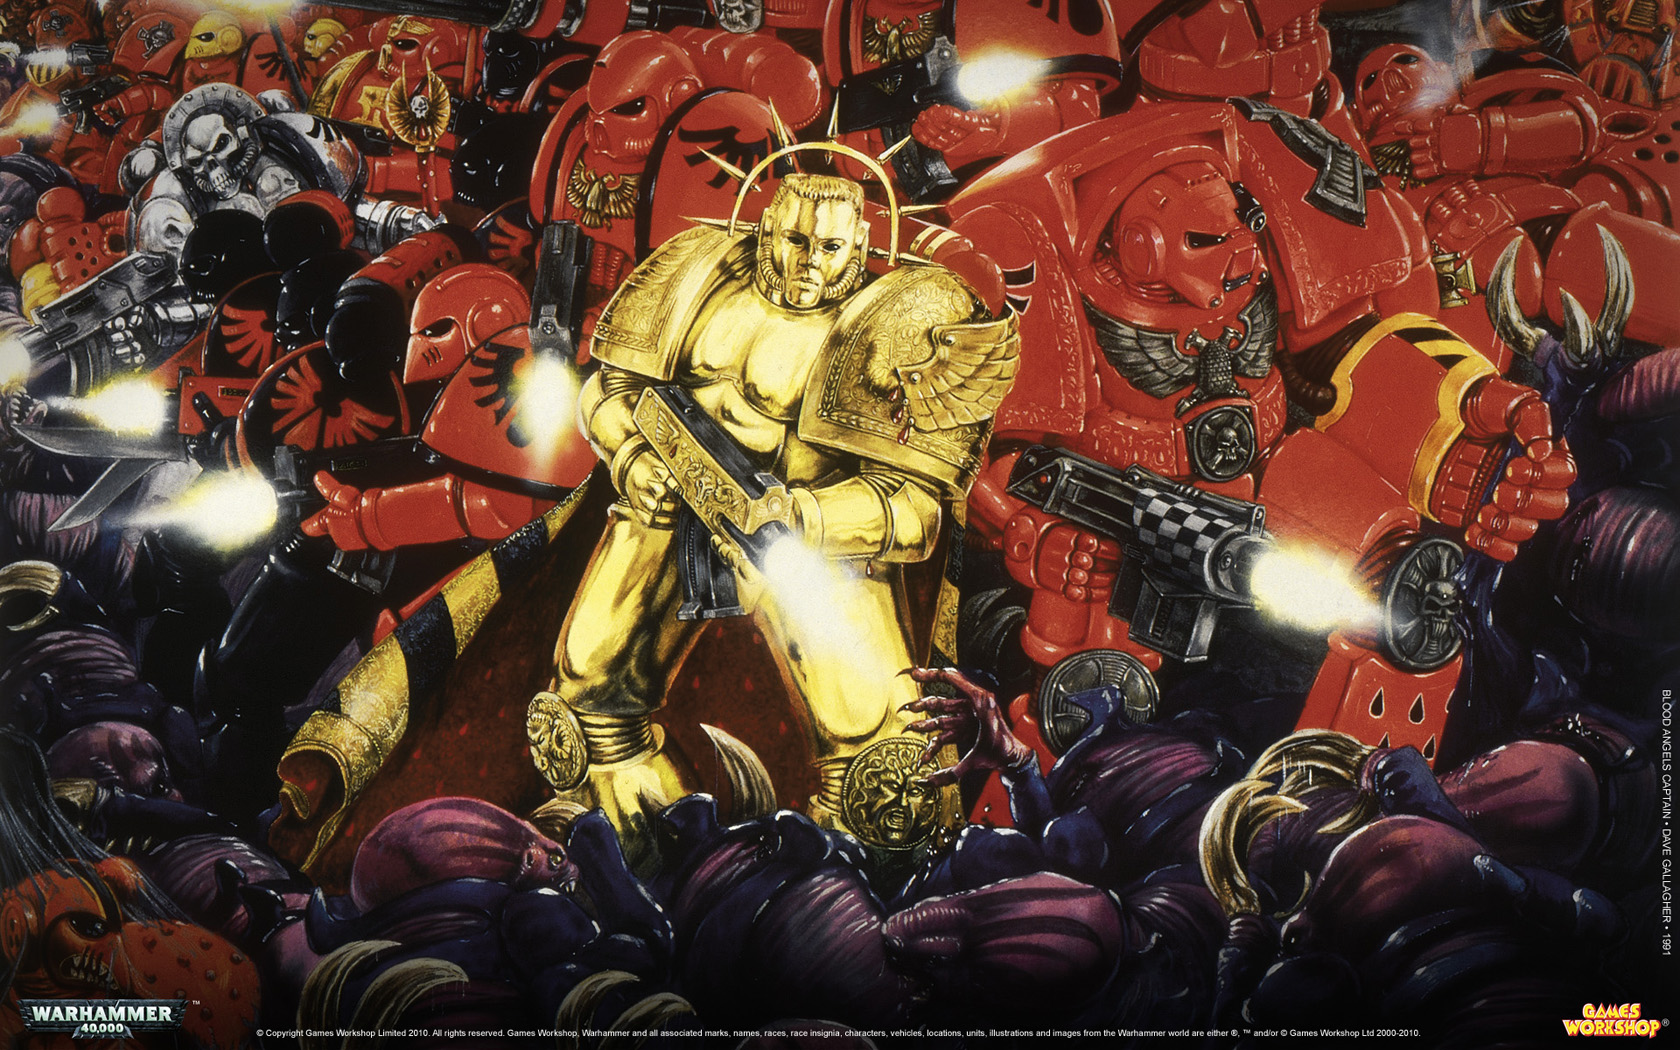 General 1680x1050 Warhammer 40,000 Blood Angels battle video games video game characters